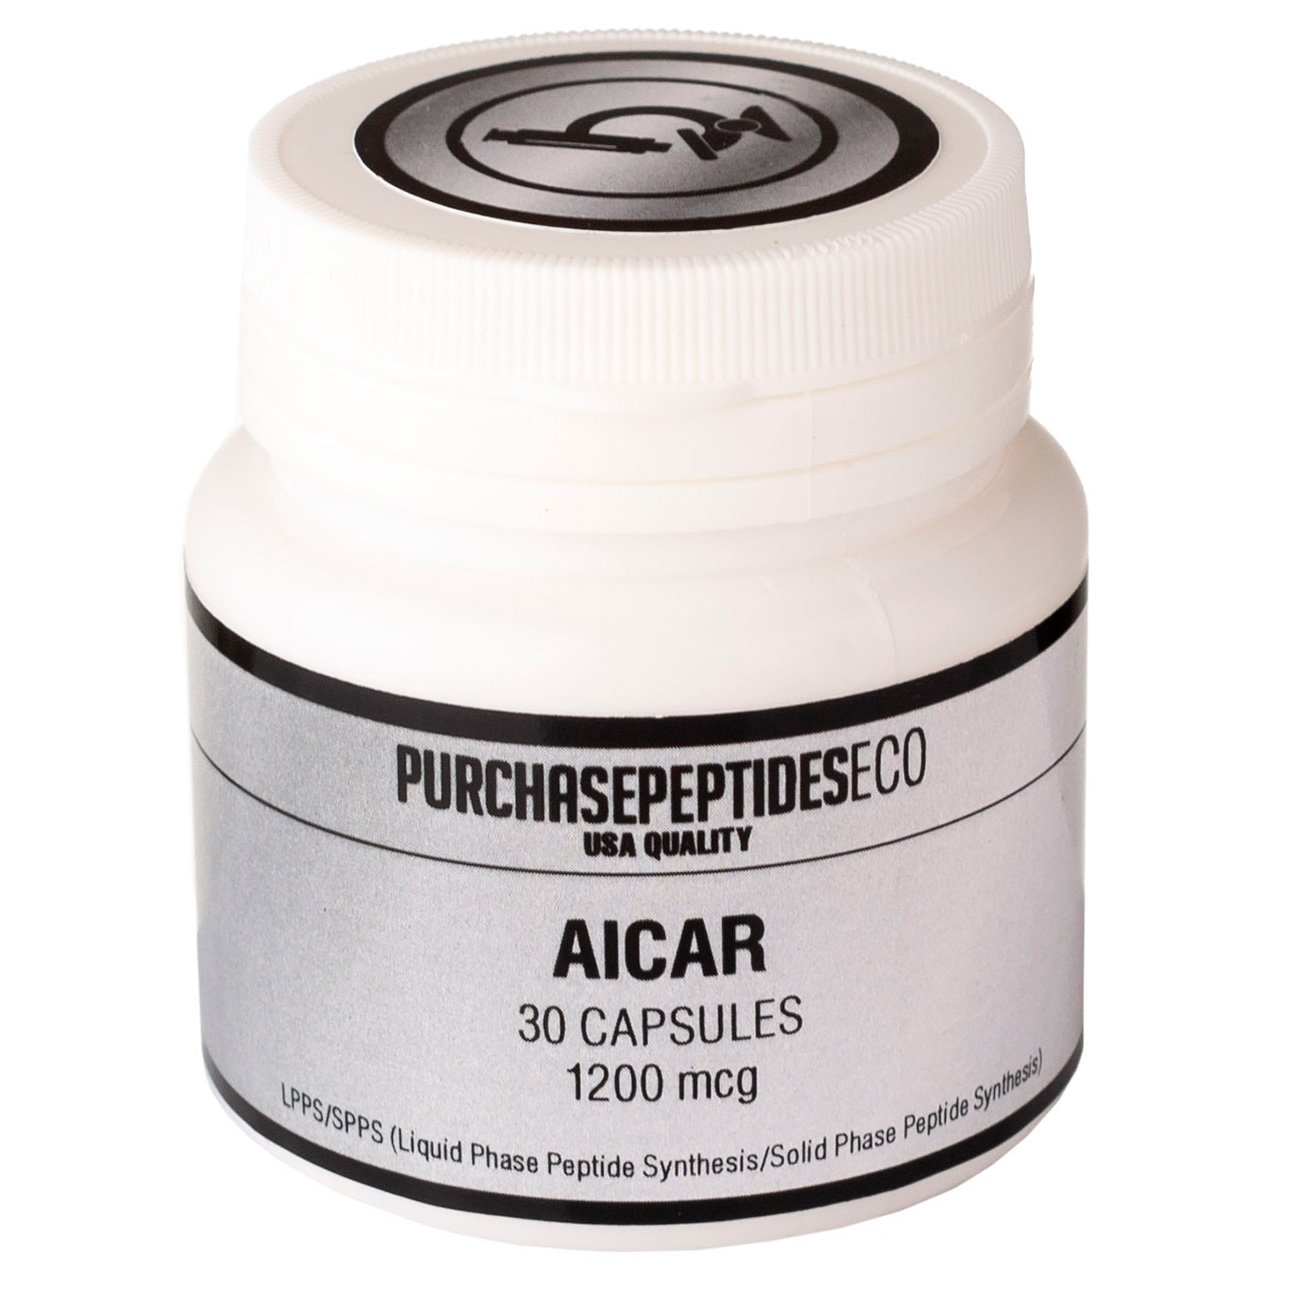 Aicar капсулы,  мл, PurchasepeptidesEco. Пептиды. 